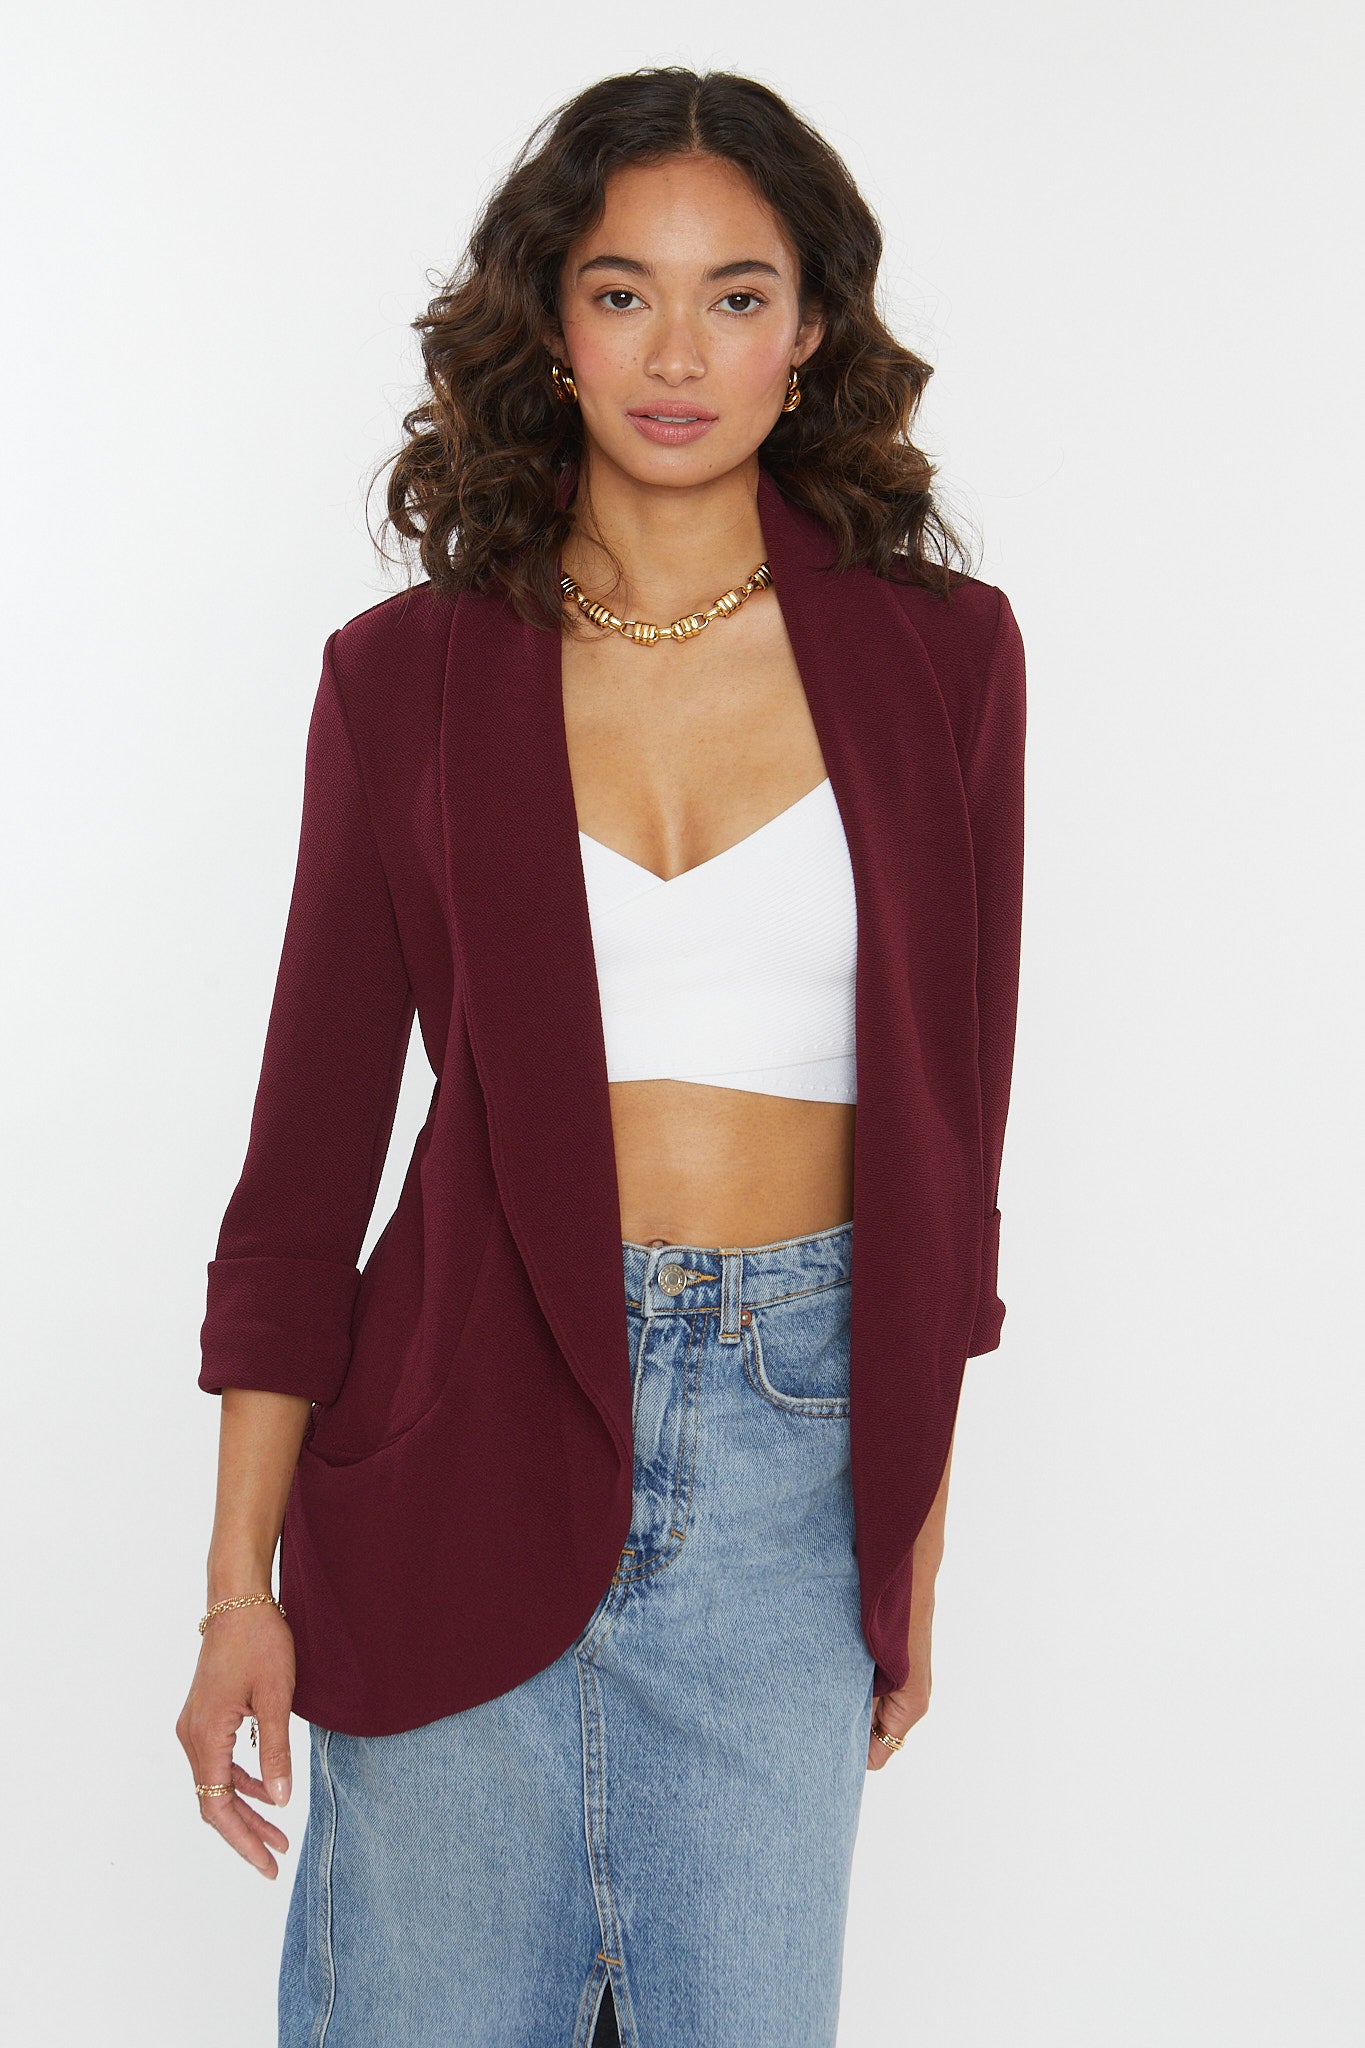 Classic Melanie Shawl Simple Staple Burgundy Color Workwear Office Wear Women’s Outerwear Blazer Jacket Everyday Shawl Front Pockets Best Seller Customer Favorite Casual Style Everyday Jacket